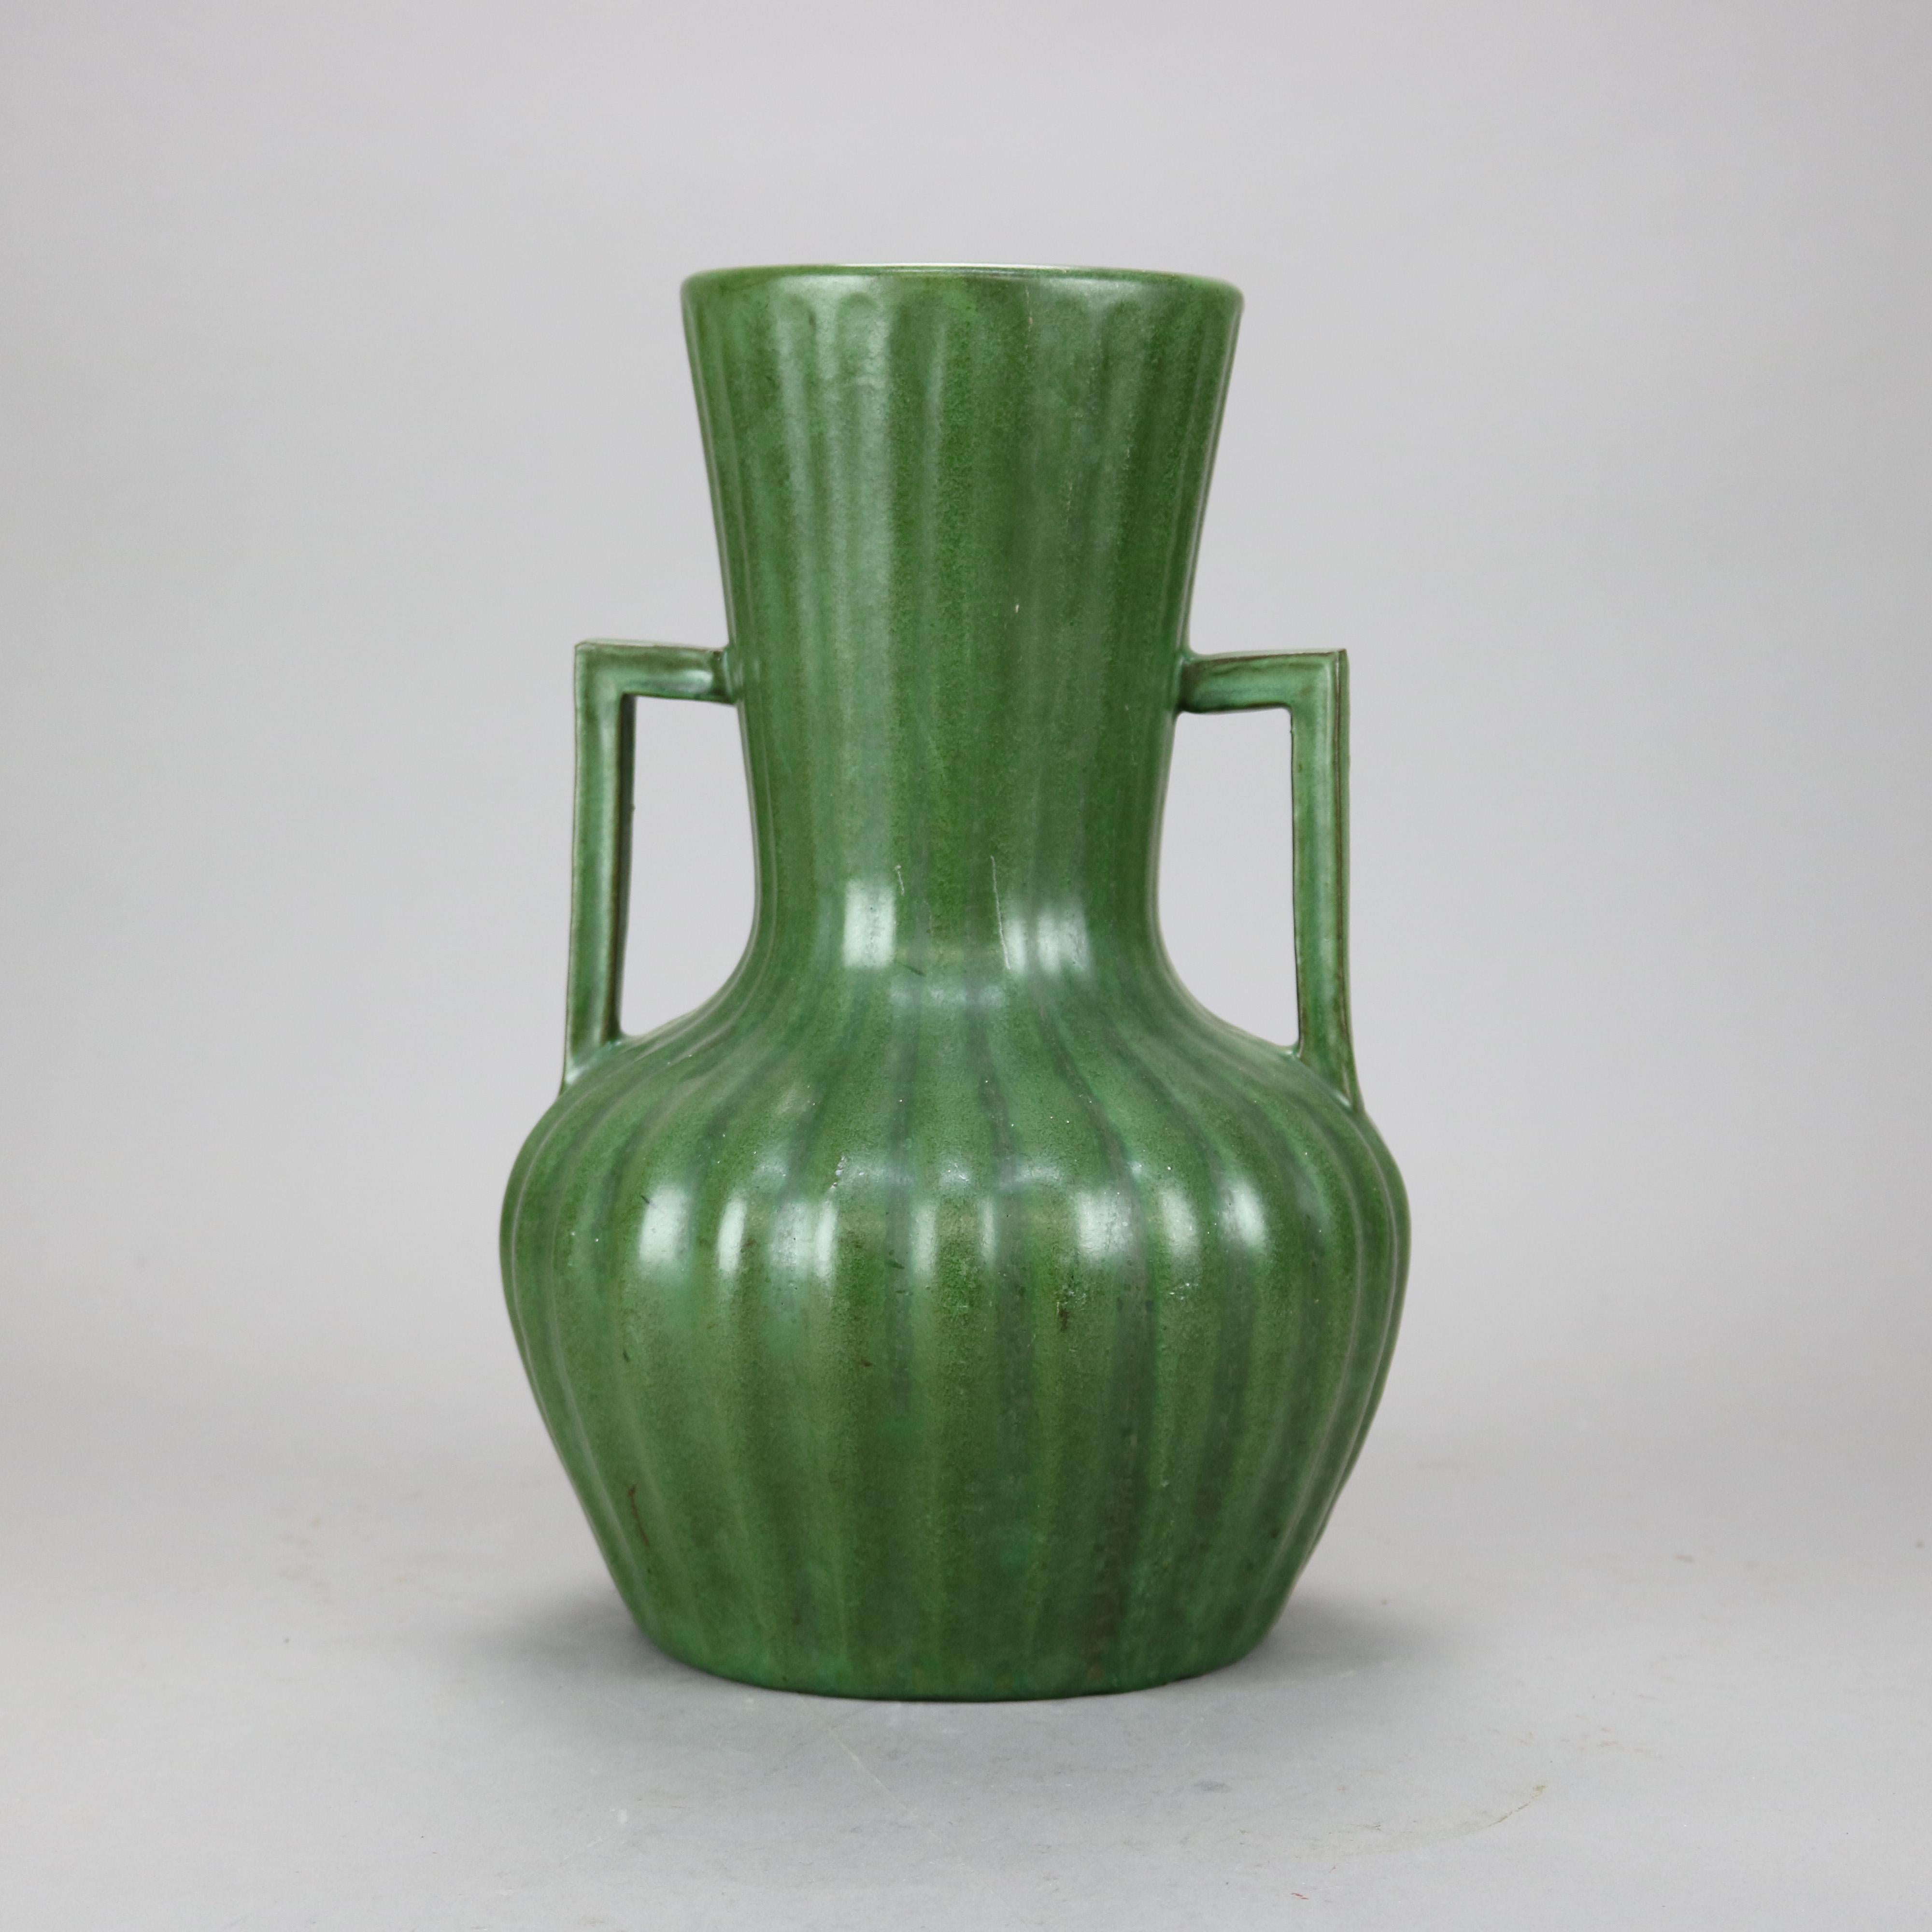 An antique Arts & Crafts vase by Peters and Reed offers art pottery construction in reeded bulbous form with double flanking handles, unmarked, c1910

Measures - 13.5'' H x 8.75' W x 8.75'' D.